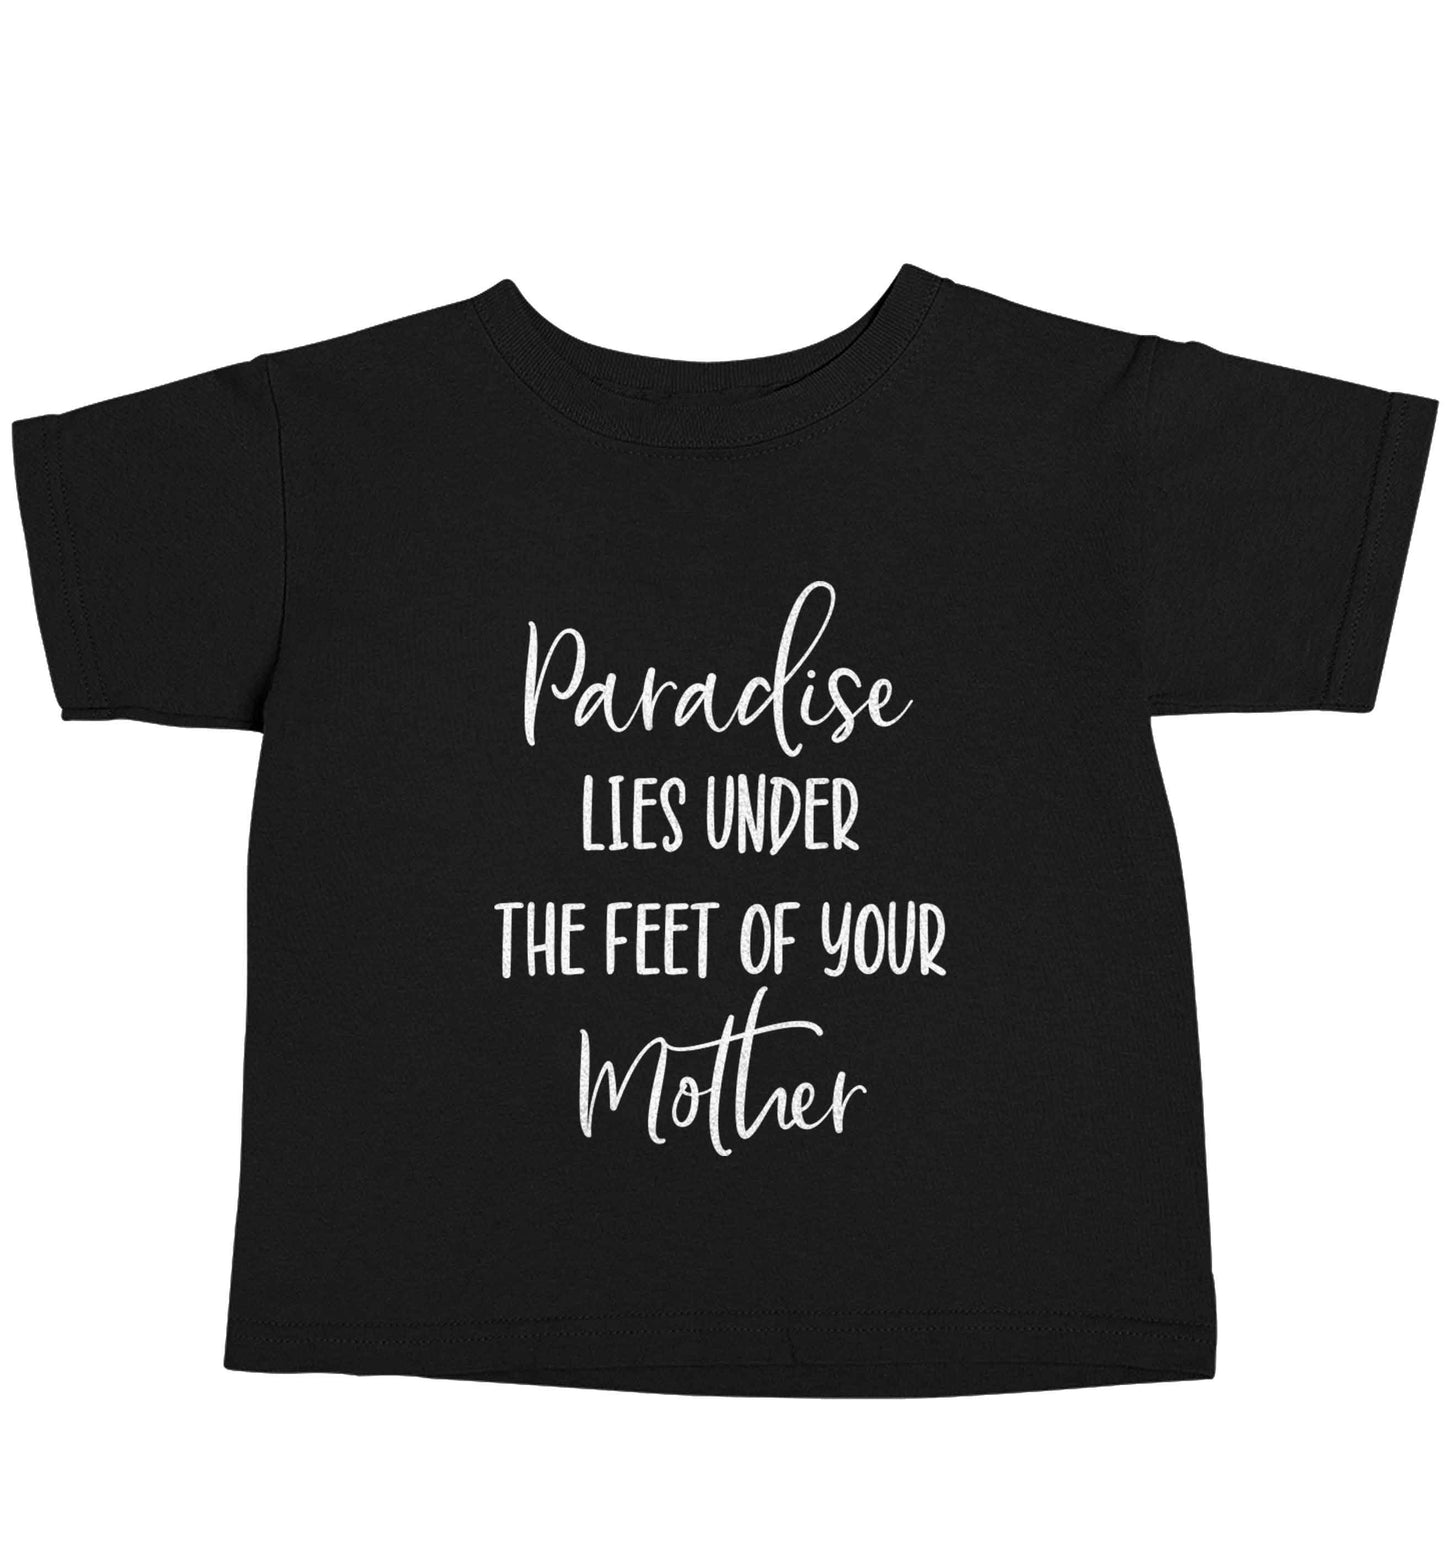 Paradise lies under the feet of your mother Black baby toddler Tshirt 2 years